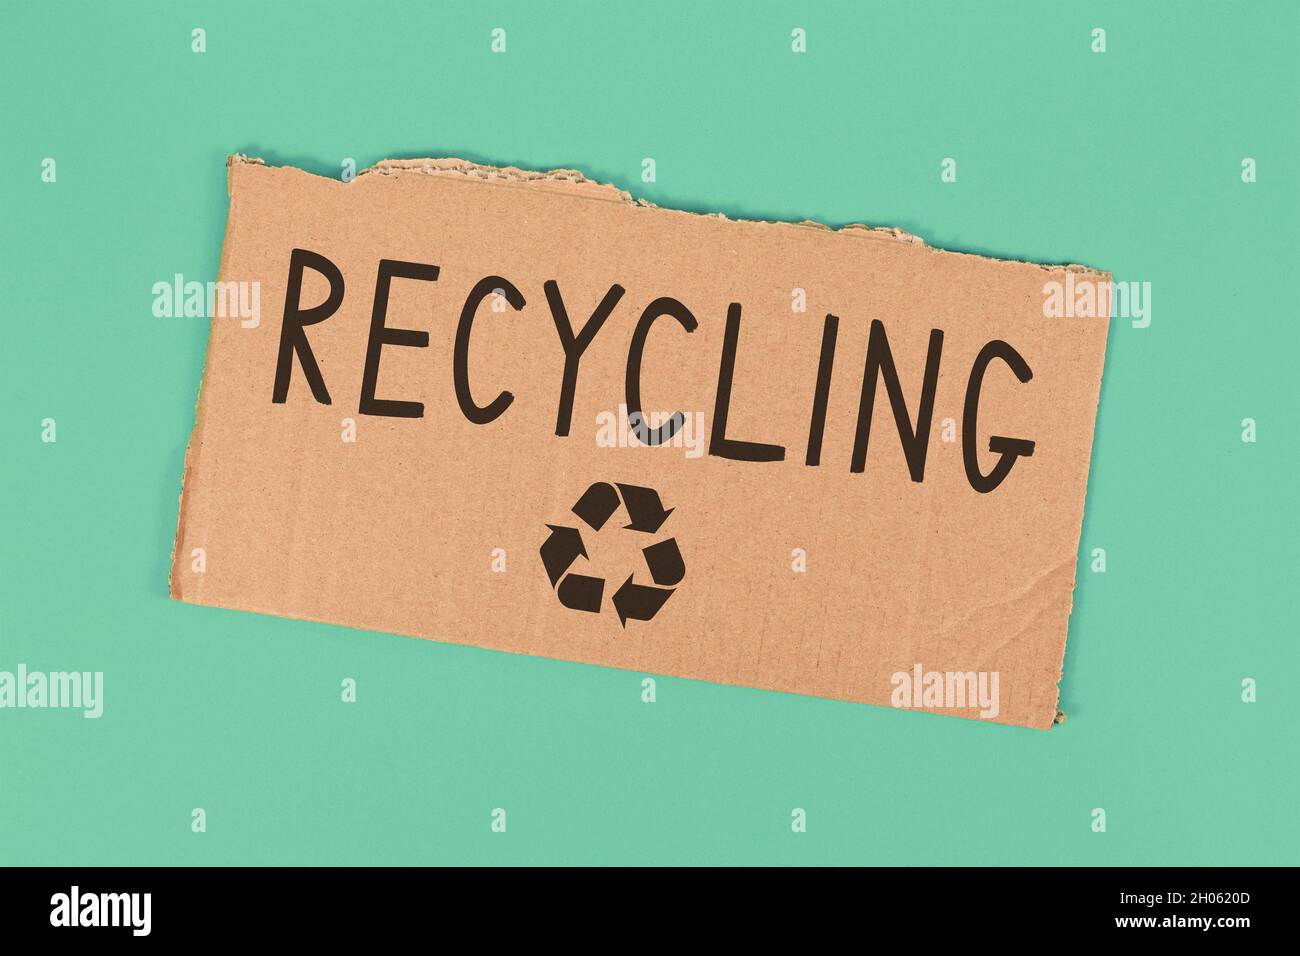 Recycling text and arrow symbol on piece of cardboard on green background Stock Photo